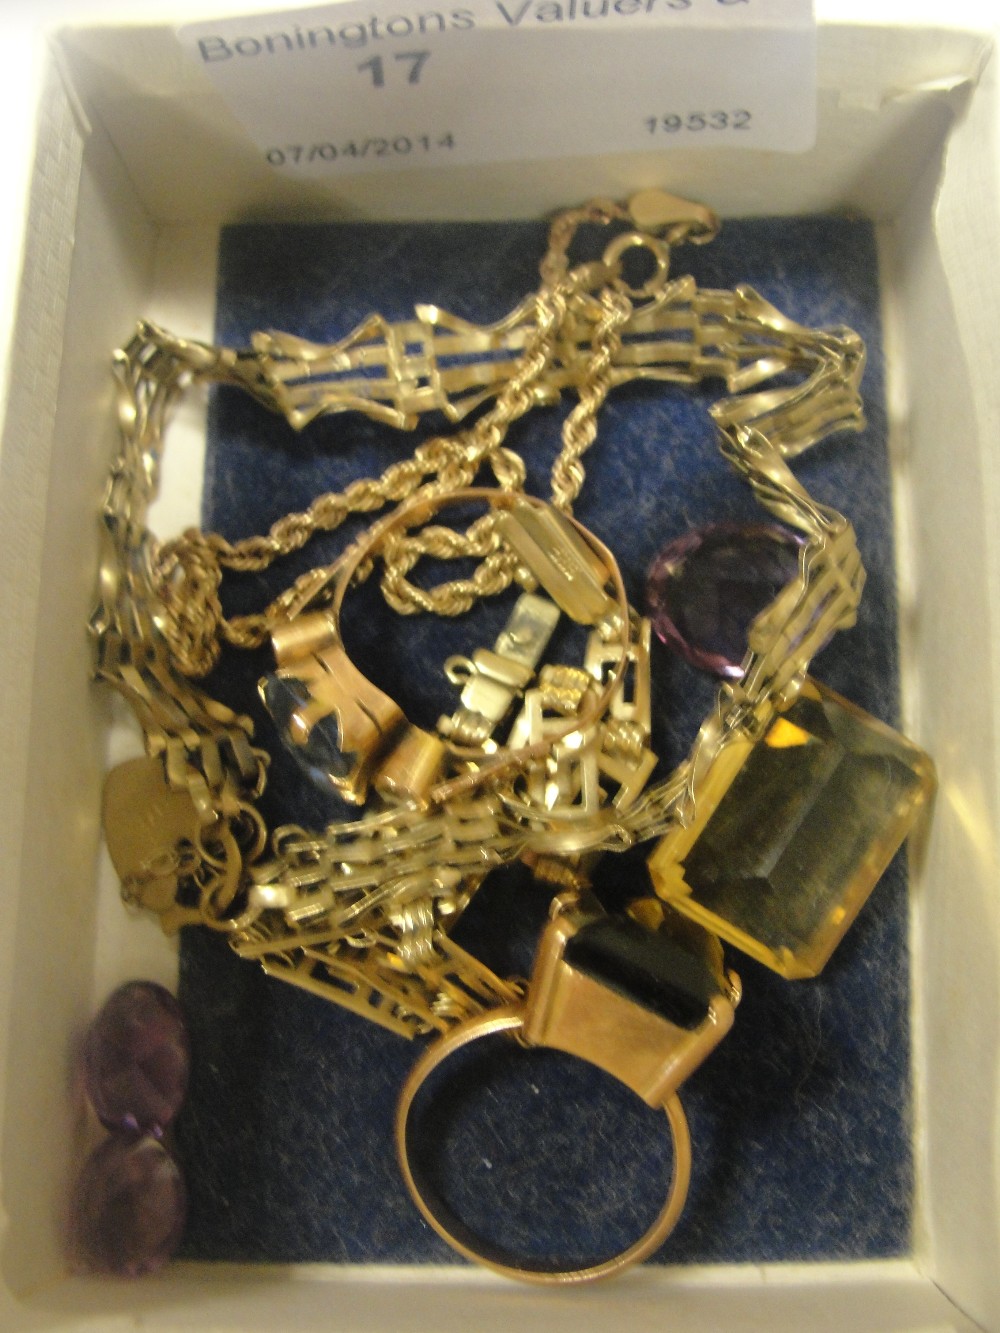 A quantity of 9ct bracelets; together with two dress rings and loose stones